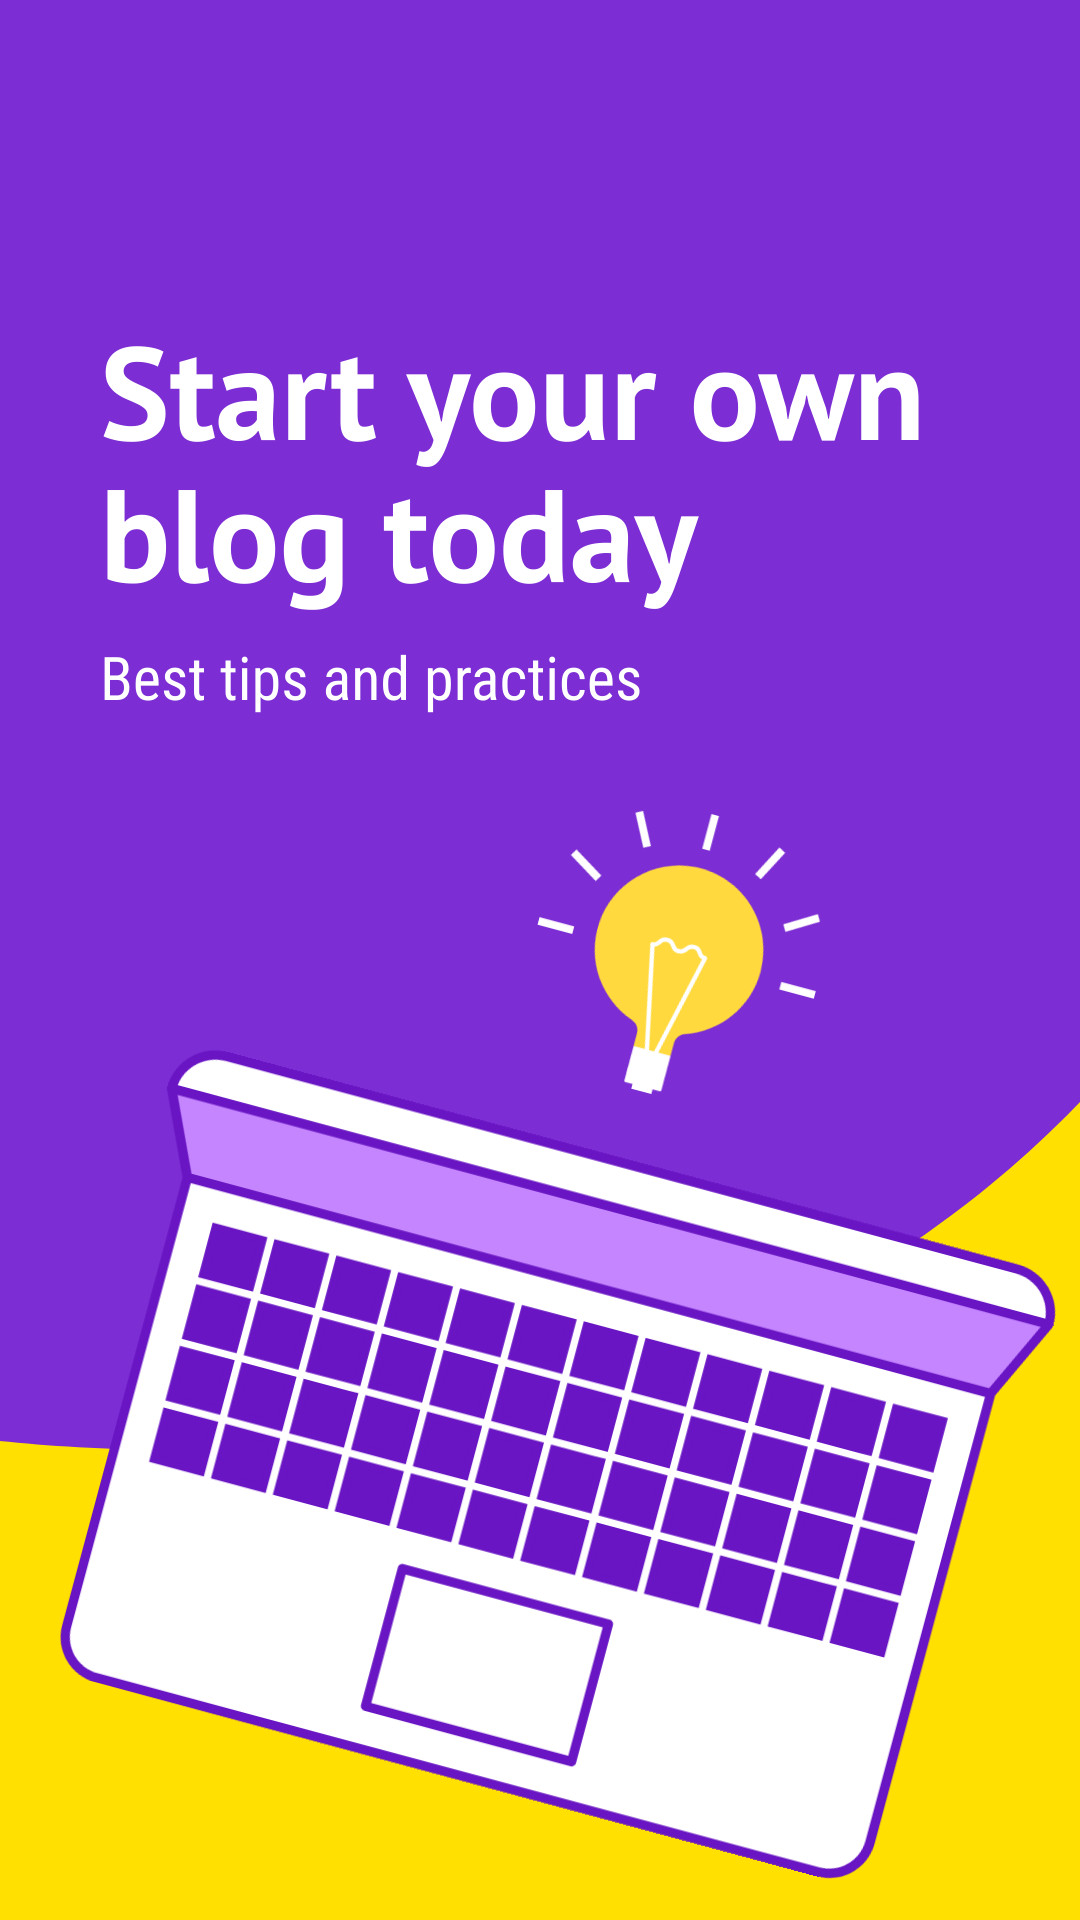 Best Tips to Start Your Blog